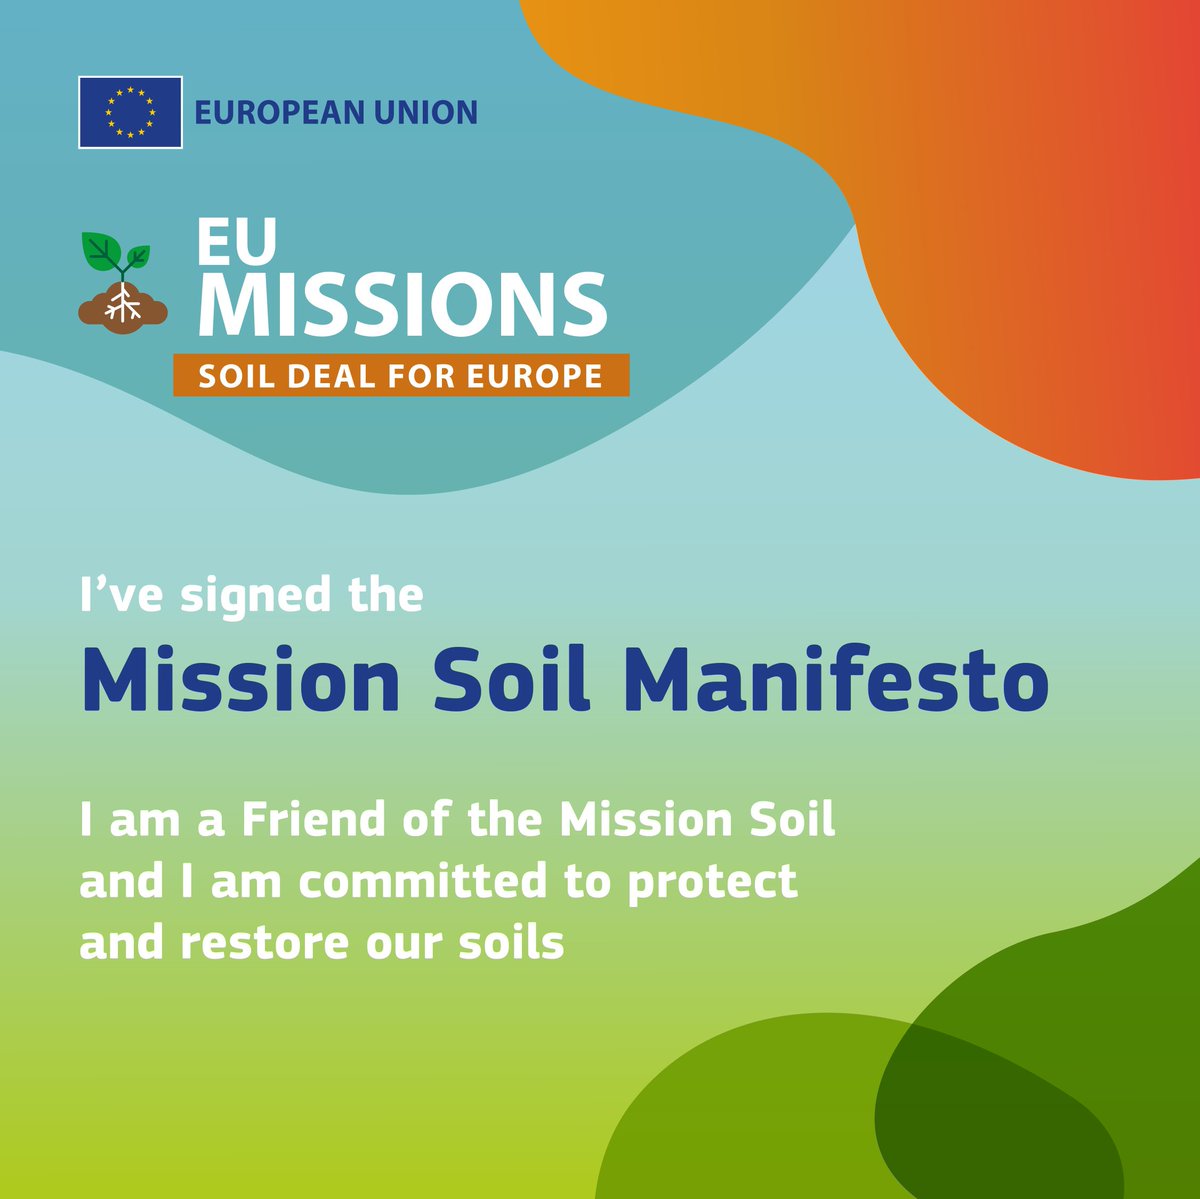 I am a friend of mission soil, are you friend of mission soil?